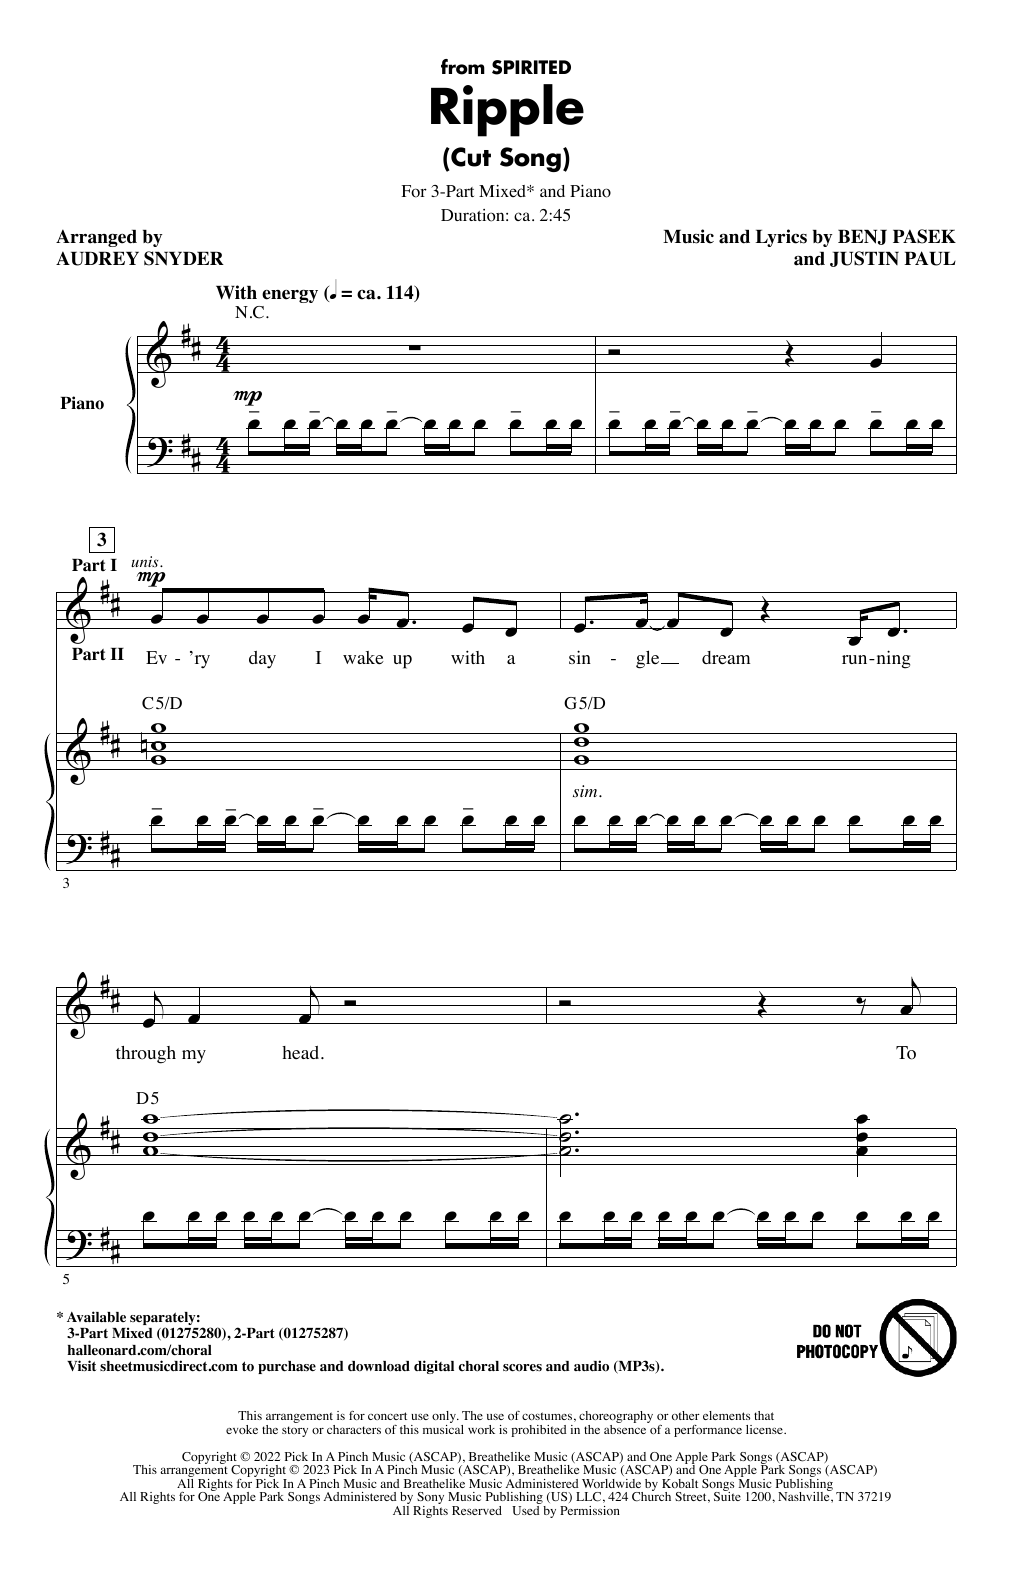 Pasek & Paul Ripple (Cut Song) (from Spirited) (arr. Audrey Snyder) sheet music notes and chords arranged for 3-Part Mixed Choir